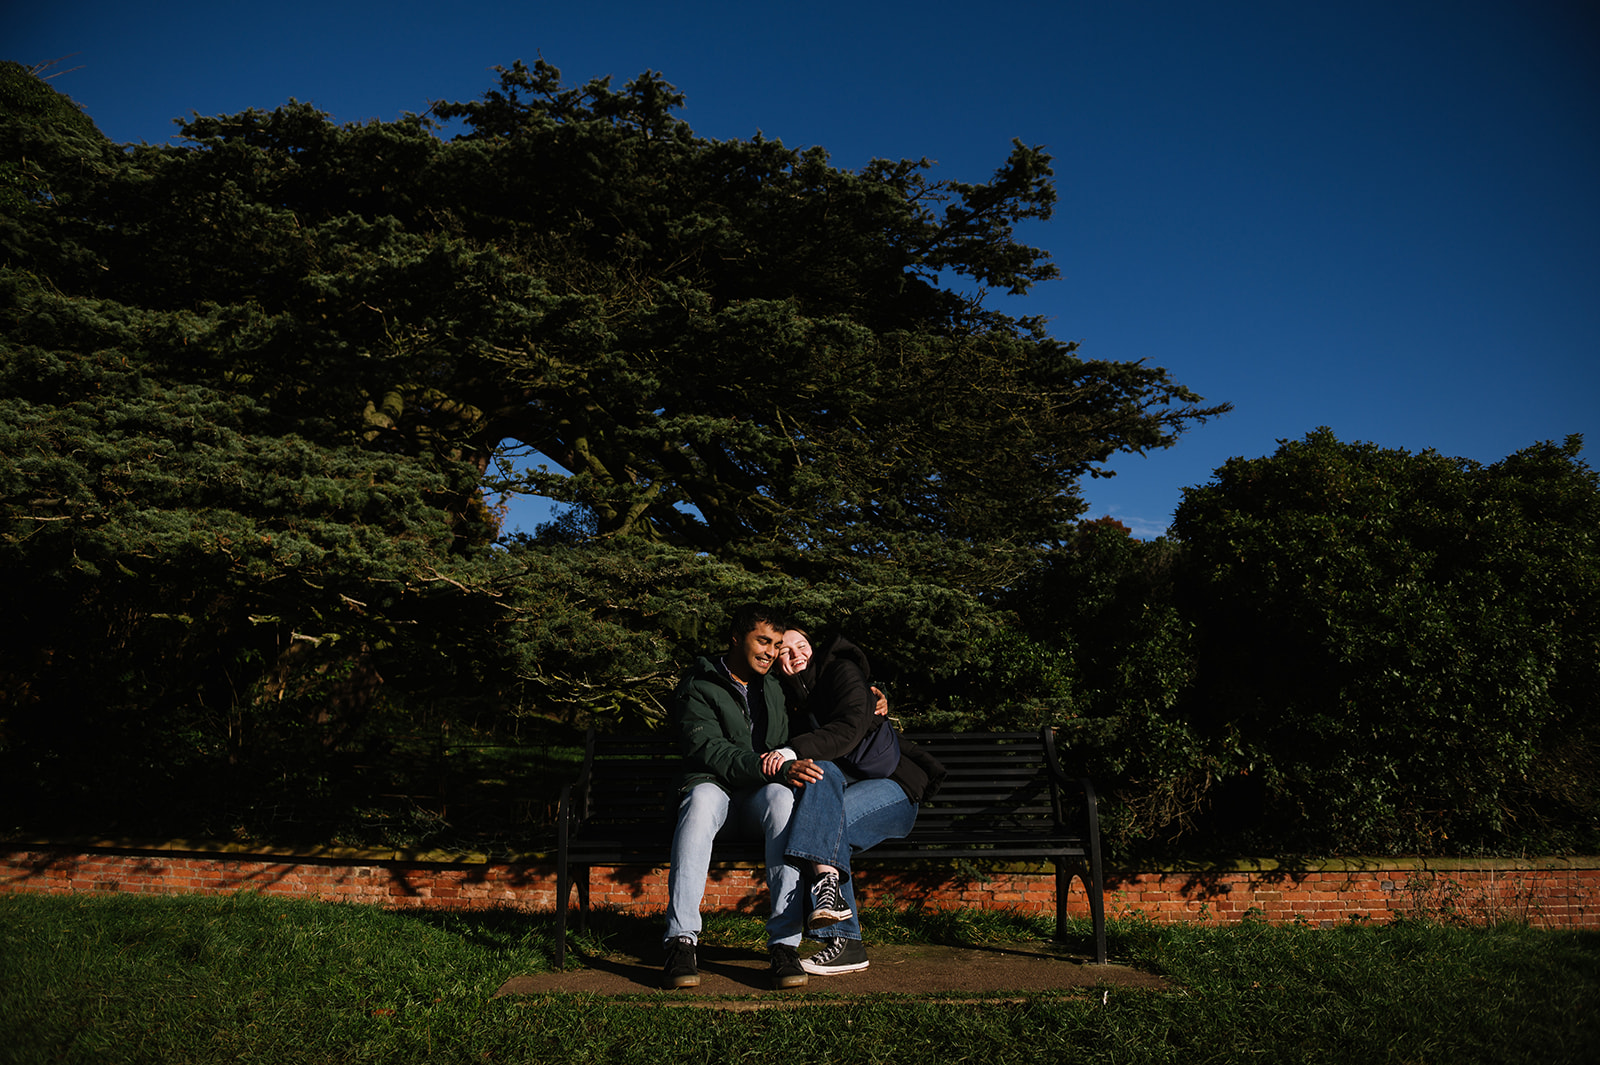 Couple sitting on a park bench with a tree behind them